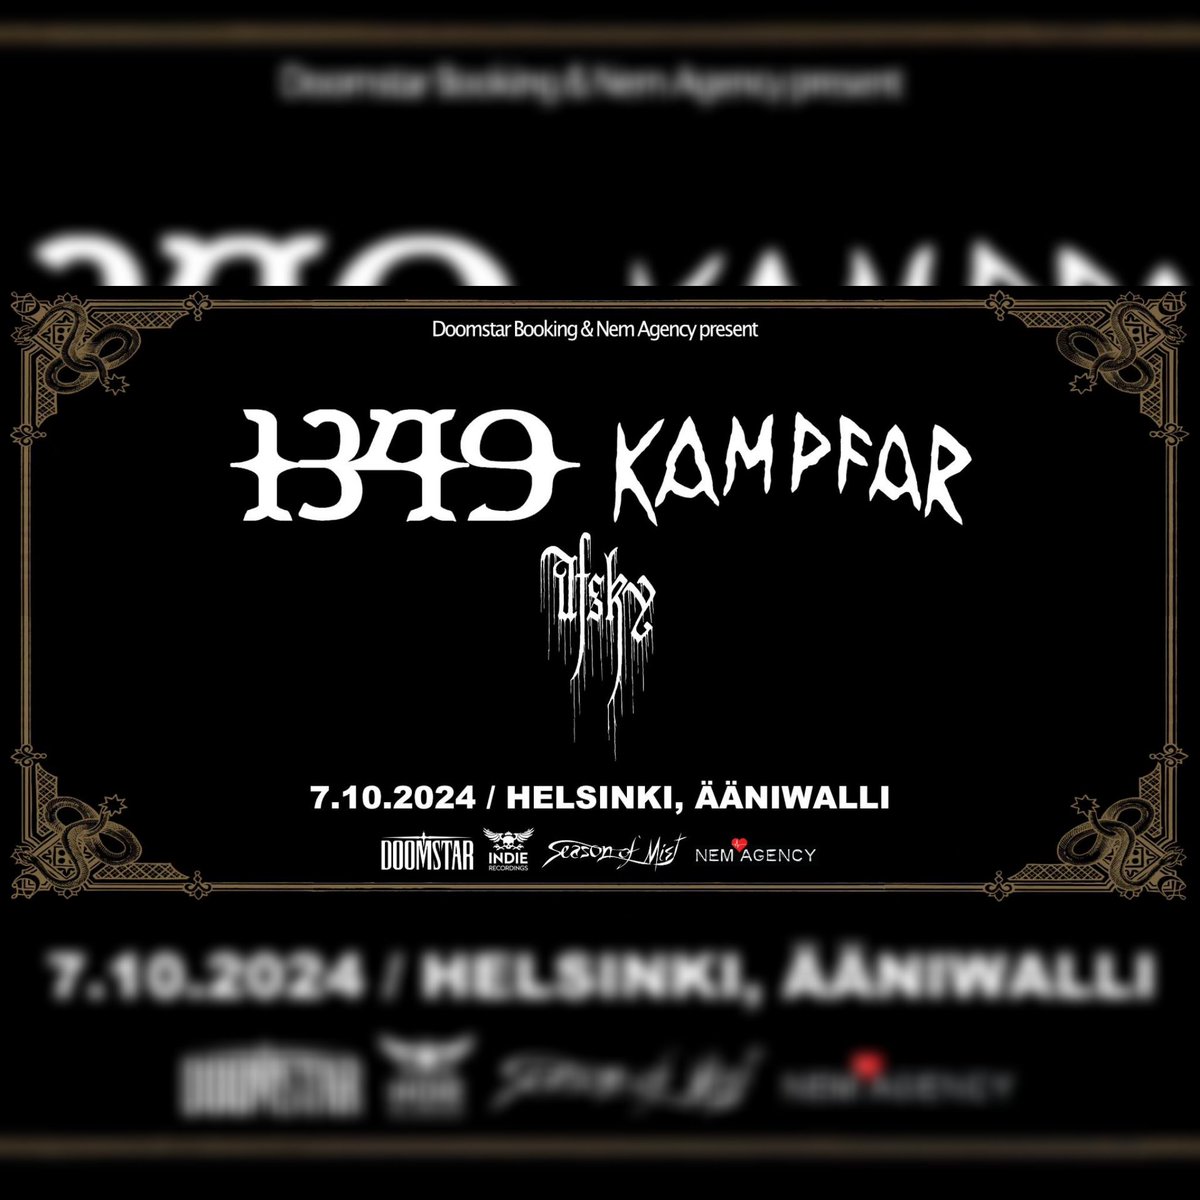 AURAL HELLFIRE ARRIVES IN HELSINKI ON OCTOBER 7TH. @1349official and @Norsepagans, along with @afskyofficial, continue their European Tour at the @aaniwalli on October 7th. Tickets: tiketti.fi/1349-kampfar-a… DO NOT MISS IT. #legion1349 #auralhellfire #kampfar #afsky #helsinki